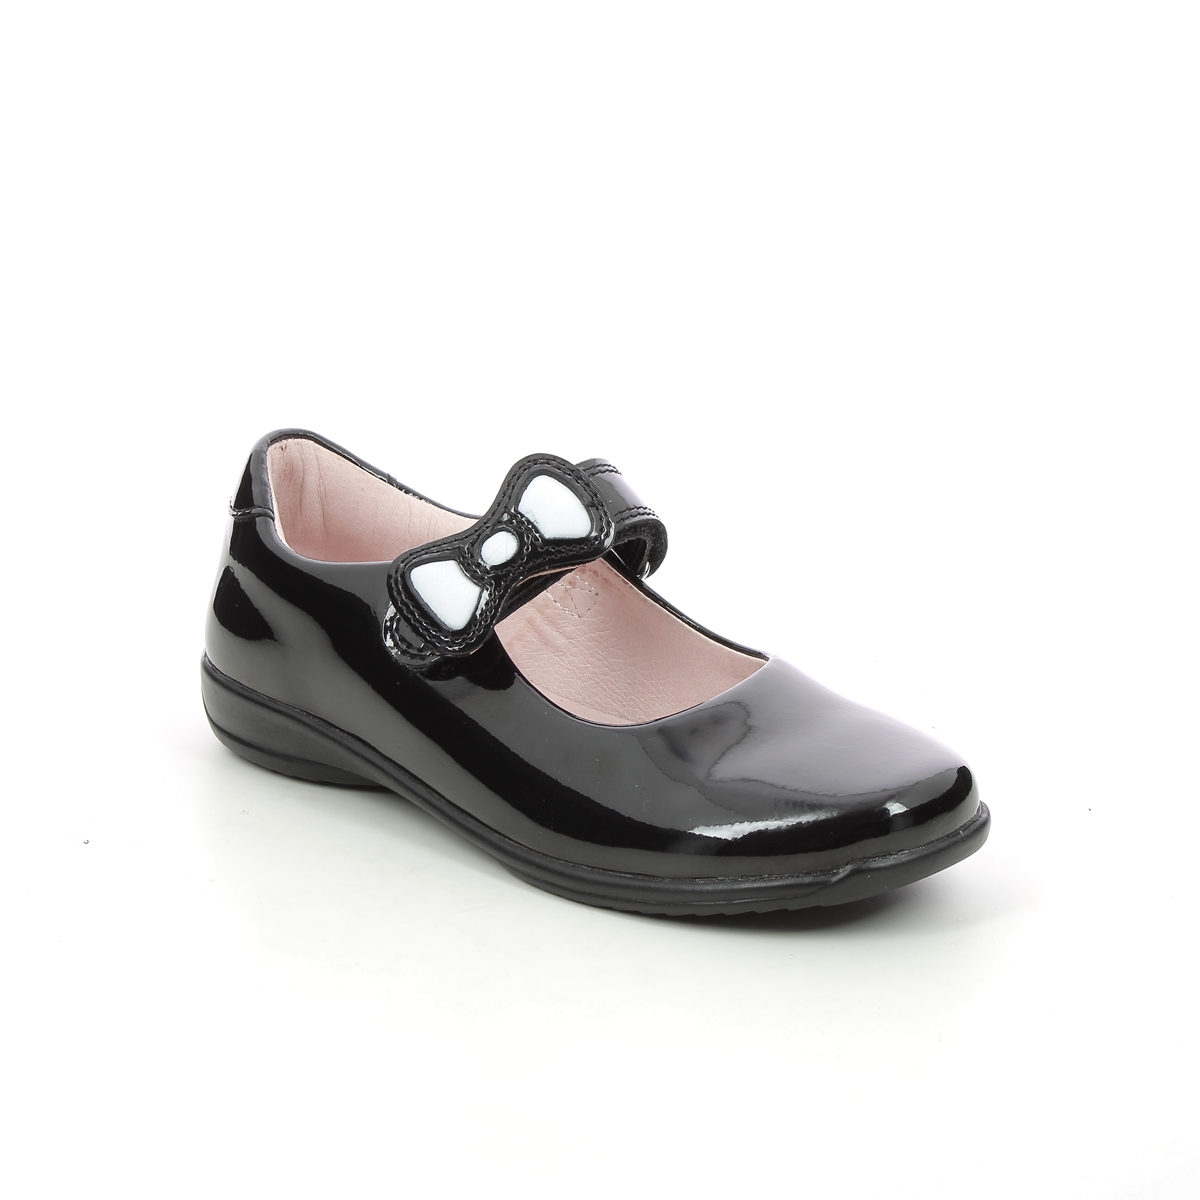 Lelli Kelly Colourissima Bow F Fit Black patent Kids Girls shoes LK8802-DB01 in a Plain  in Size 28